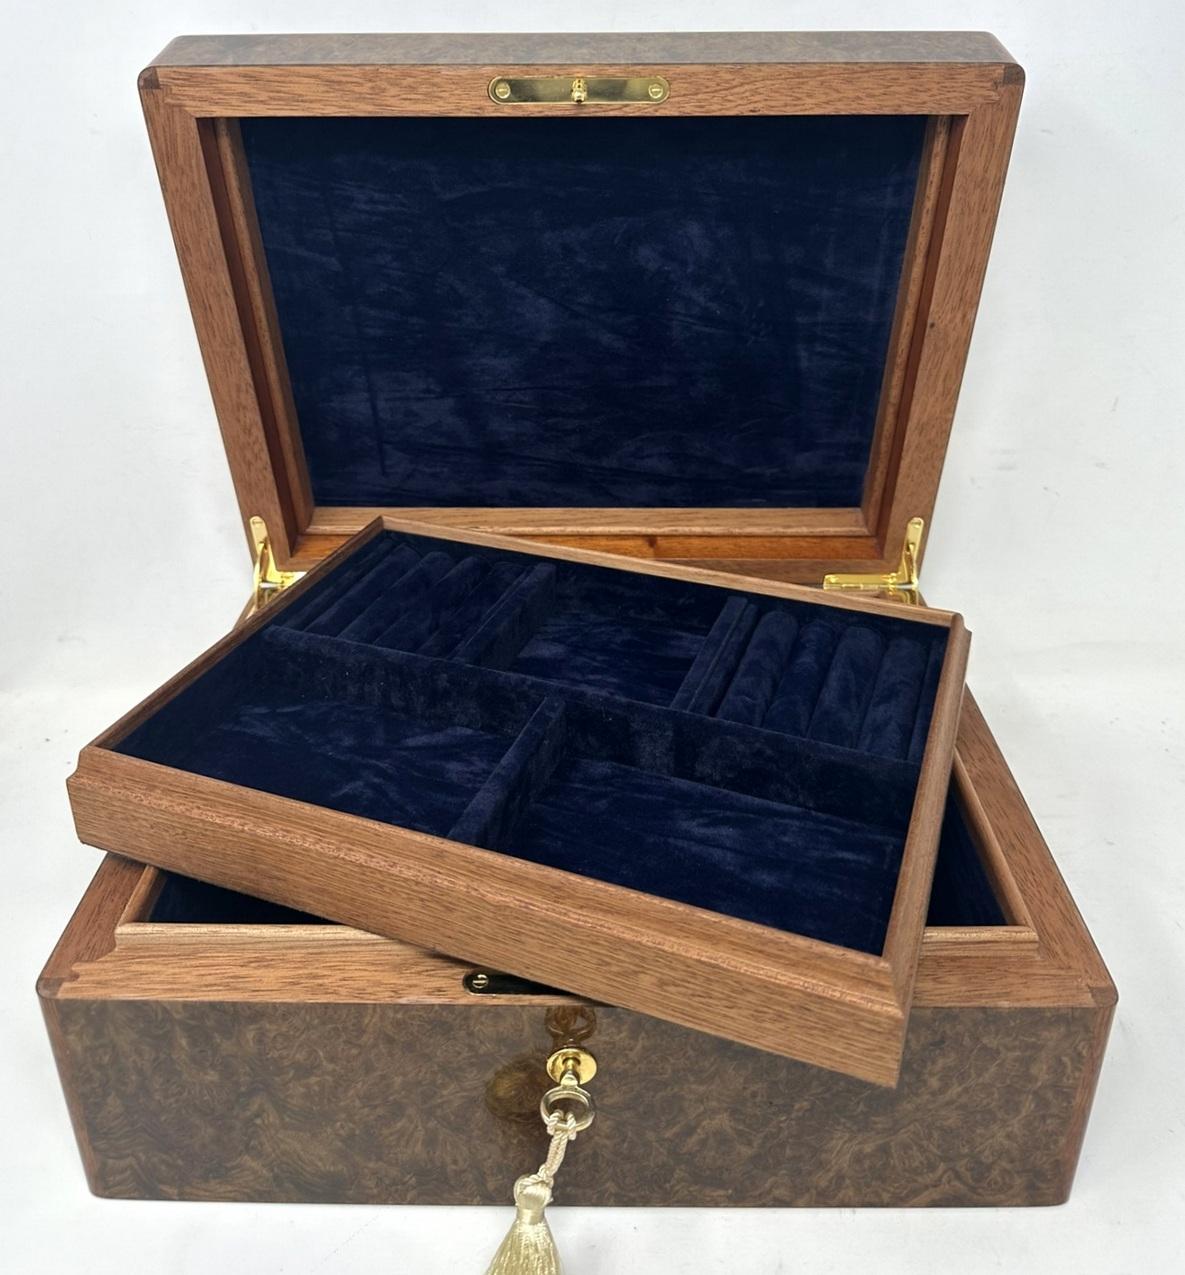 Stunning Burl Walnut Casket was manufactured by the famed Manning  Co. of Ireland  and is truly a jewel of handcrafted genius. This box is constructed of the finest woods available and the knowledge and skill of 4 generations of box making in the